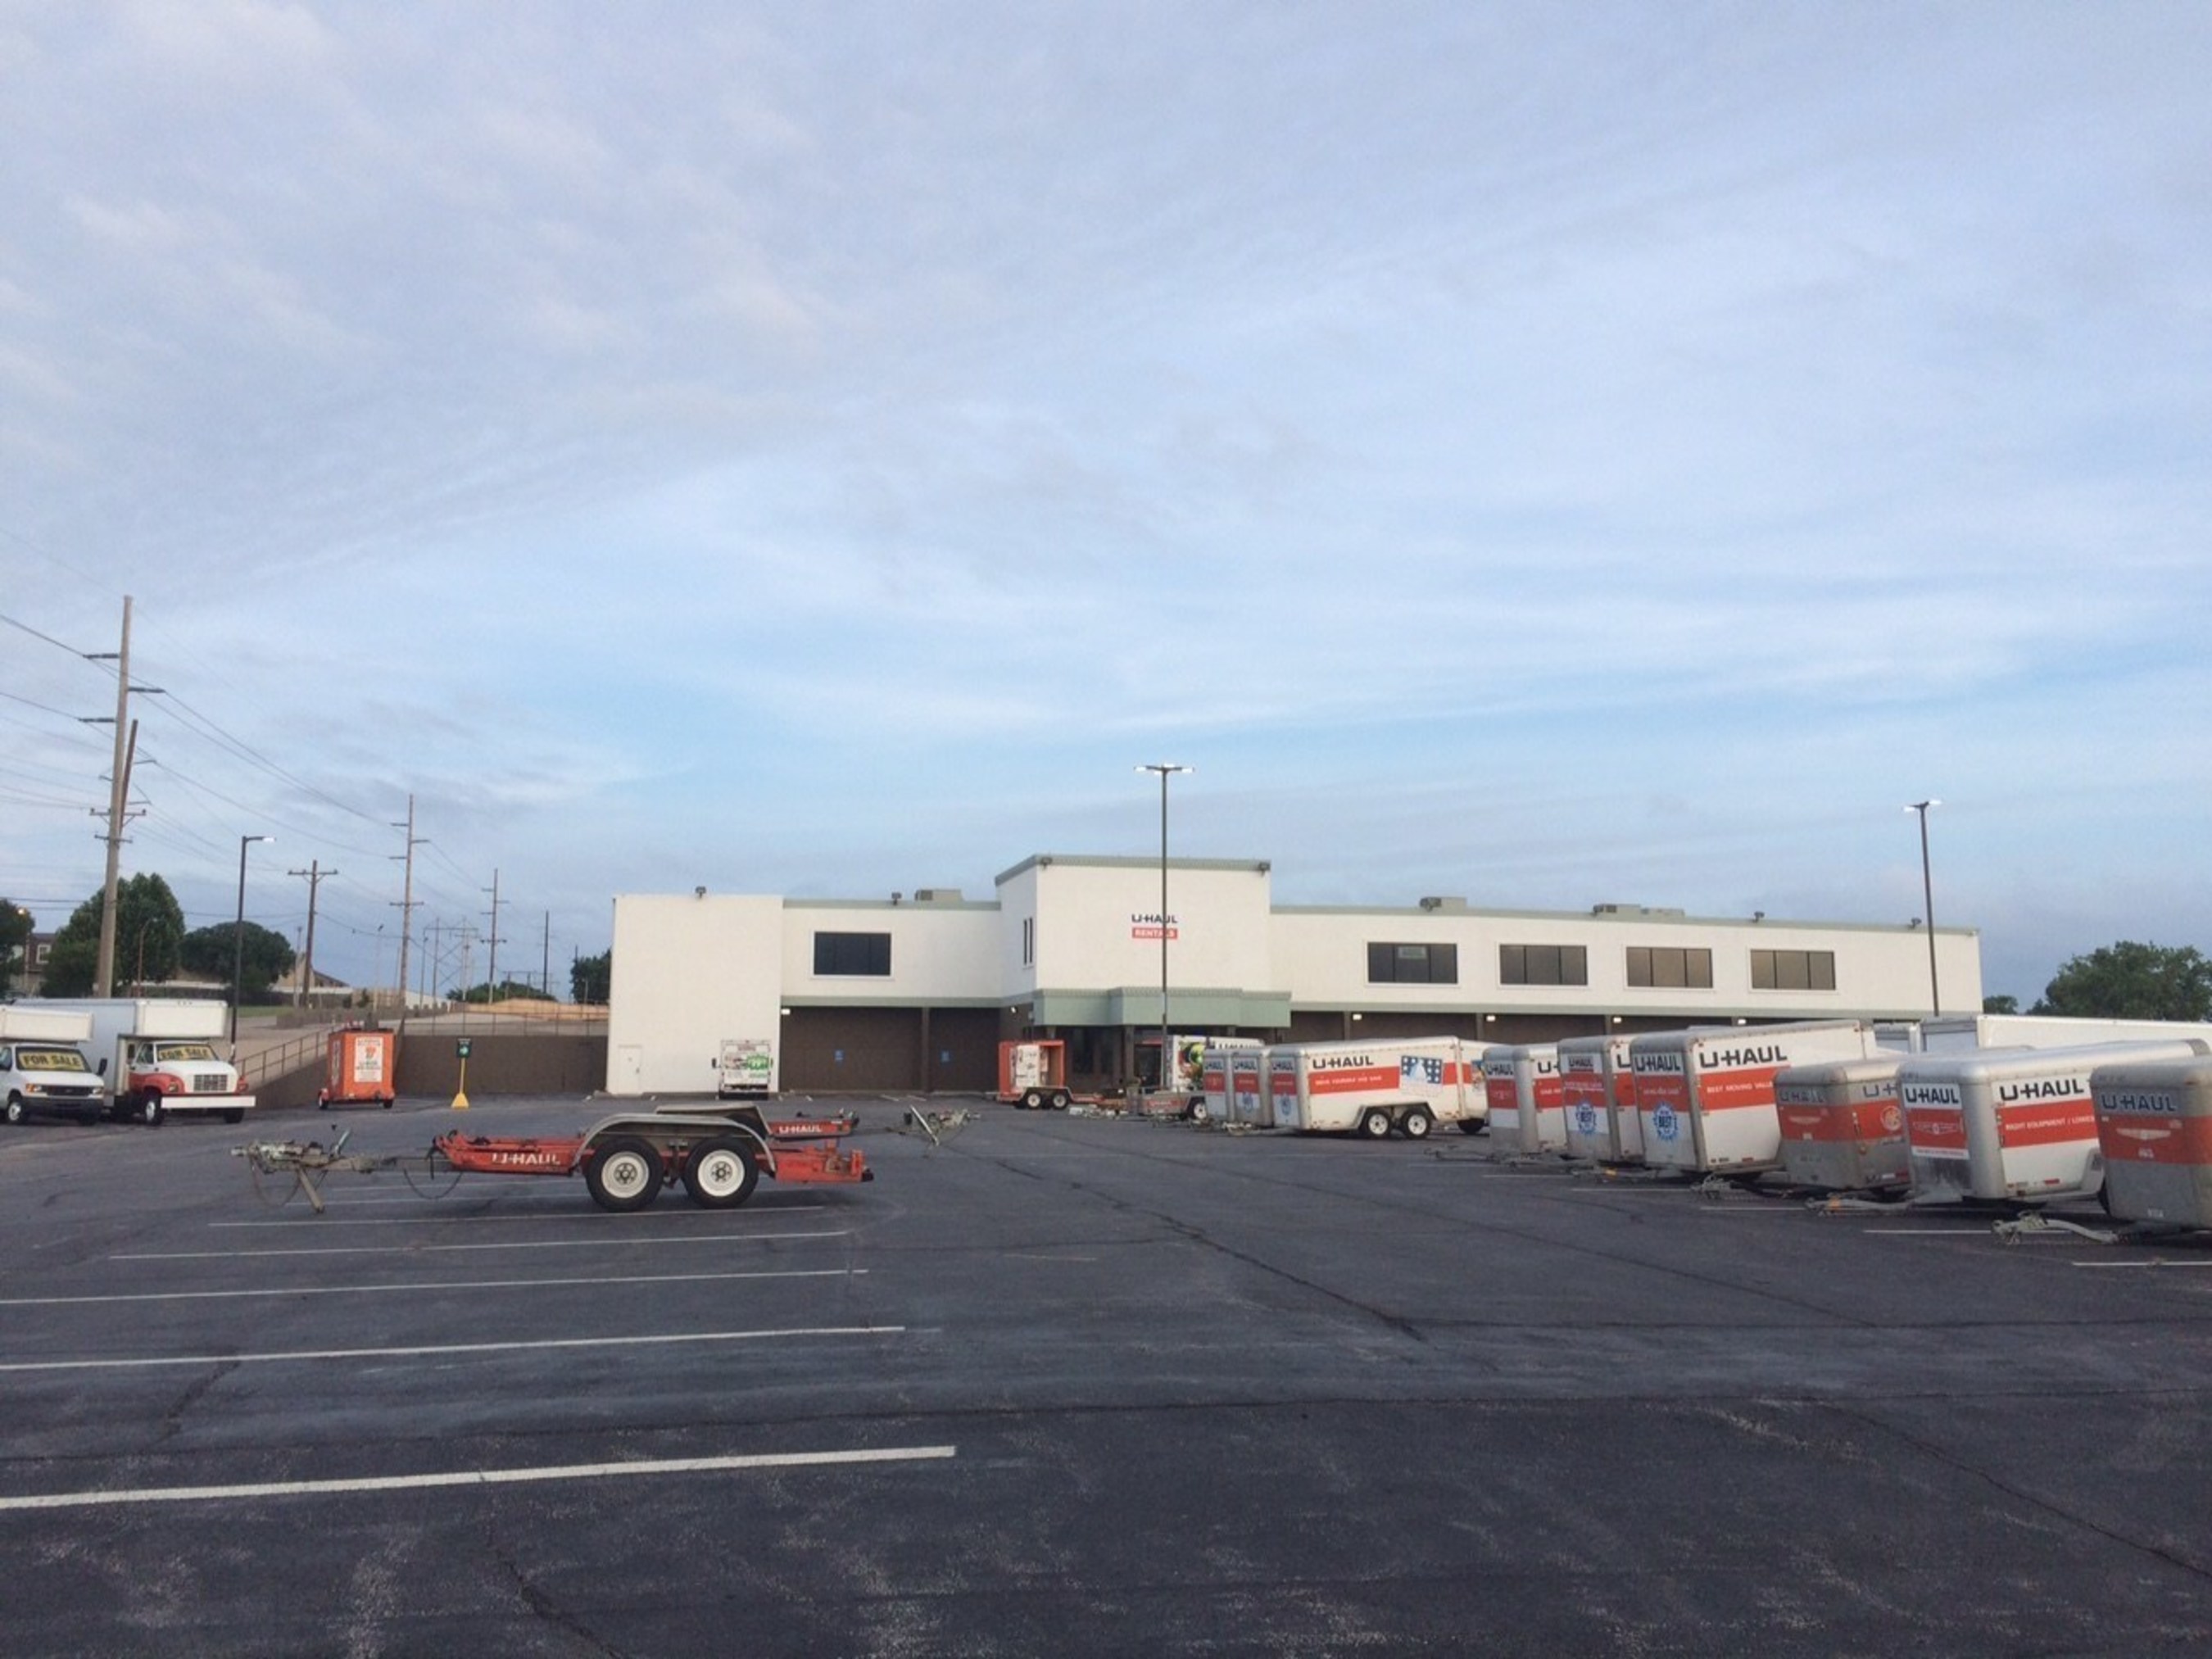 U-Haul customers in and around Tulsa will soon have secure and convenient self-storage options with the upcoming completion of U-Haul Moving & Storage of Midtown at 3500 S. Sheridan Road.